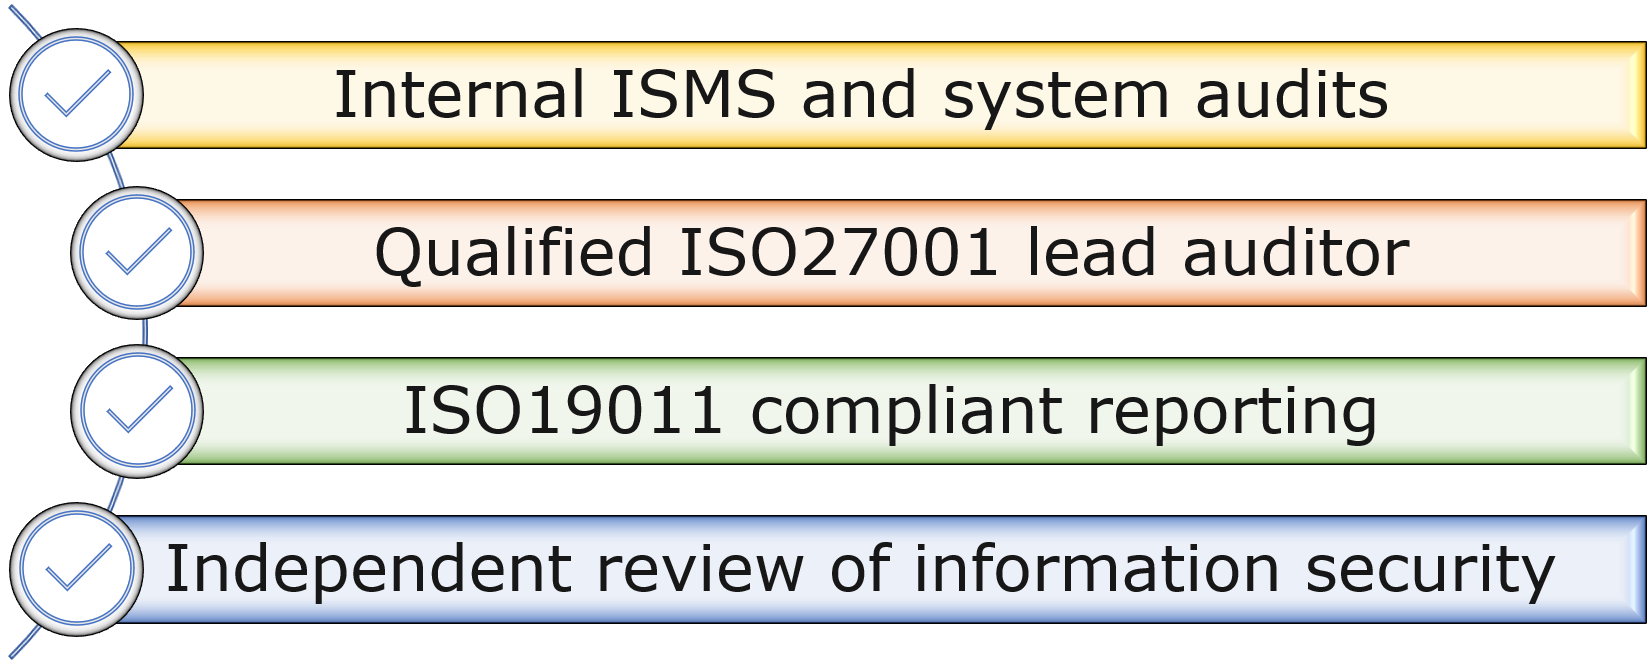 Image: Checklist - Internal ISMS and system audits / Qualifizied ISO27001 lead auditor / ISO19011 compliant reporting / Independent review of information security